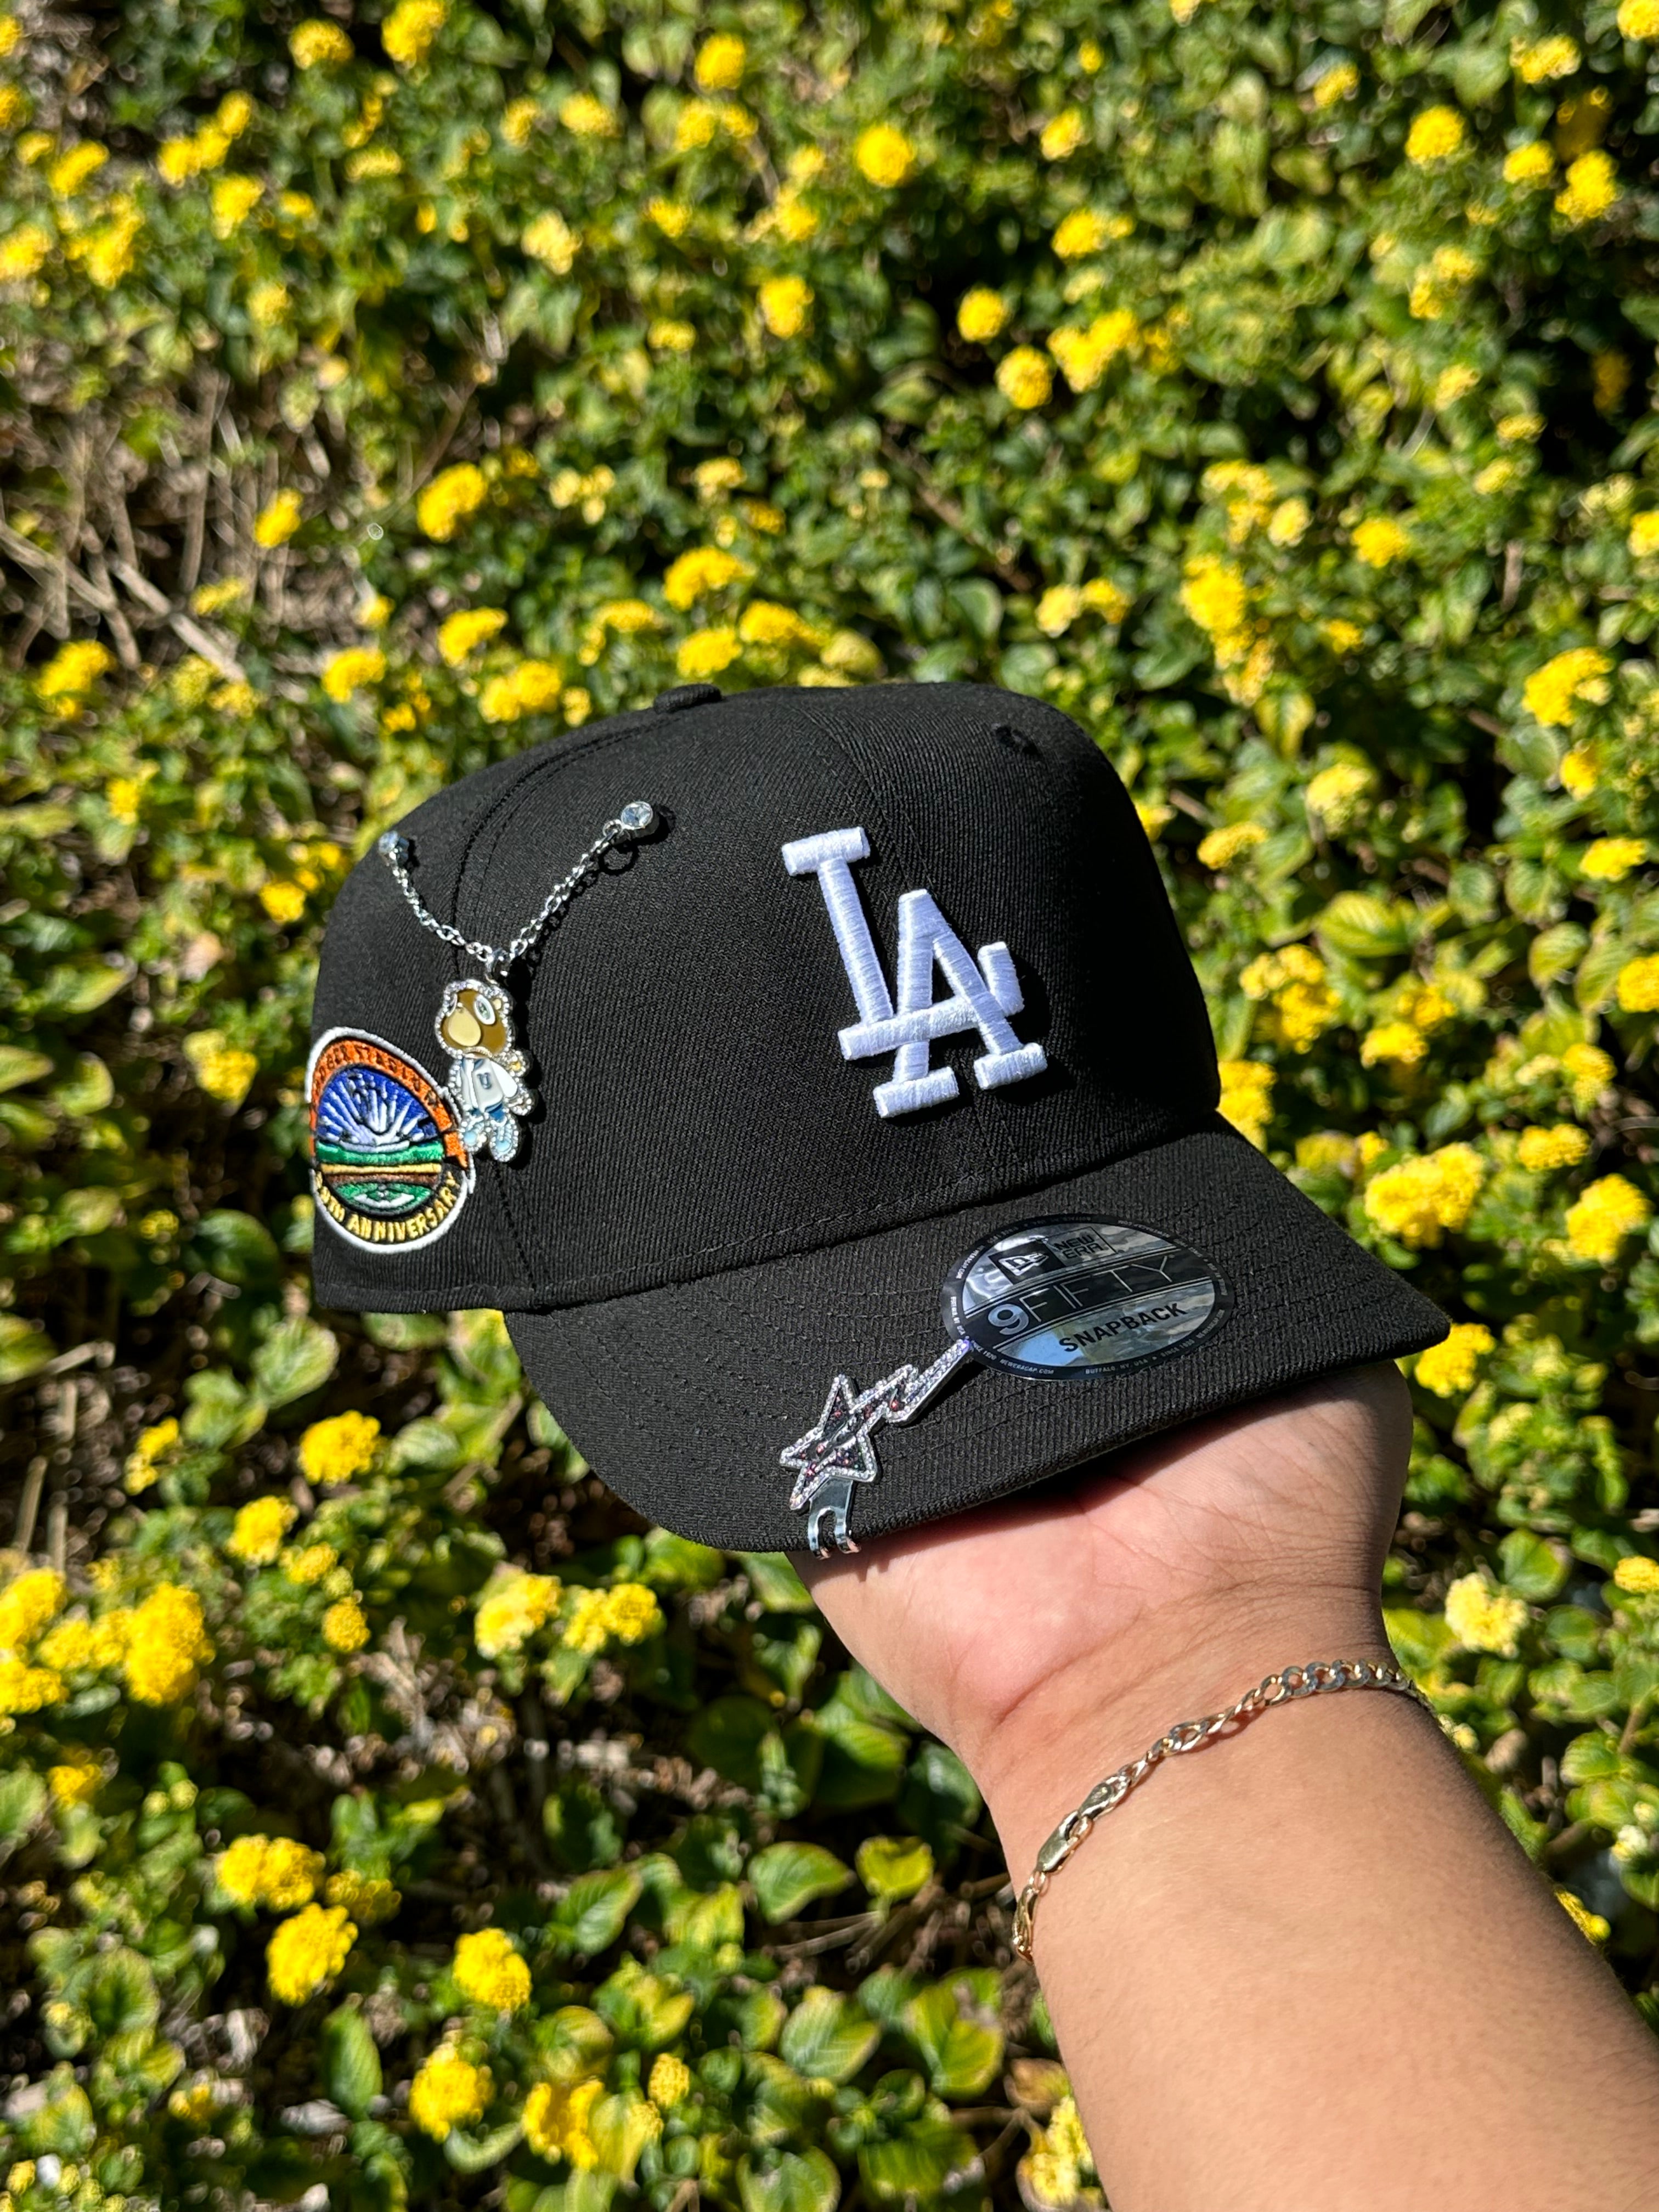 NEW ERA EXCLUSIVE 9FIFTY BLACK LOS ANGELES DODGERS SNAPBACK W/ 50TH ANNIVERSARY PATCH